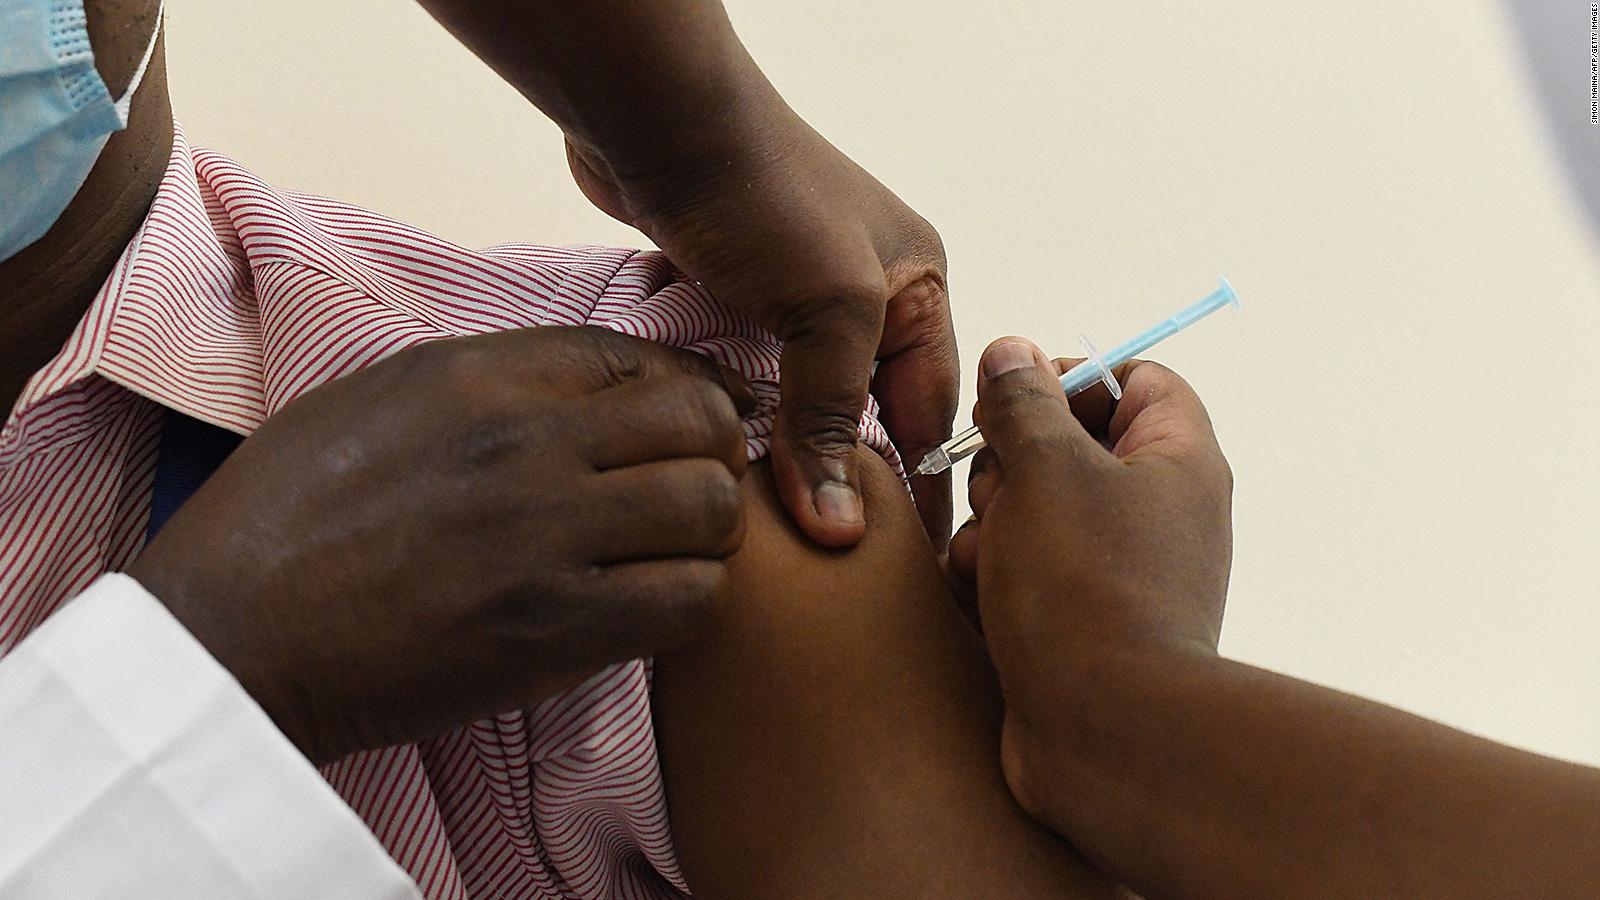 South Africa mulls vaccine passports as Covid-19 restrictions are eased | LOVED NEWS